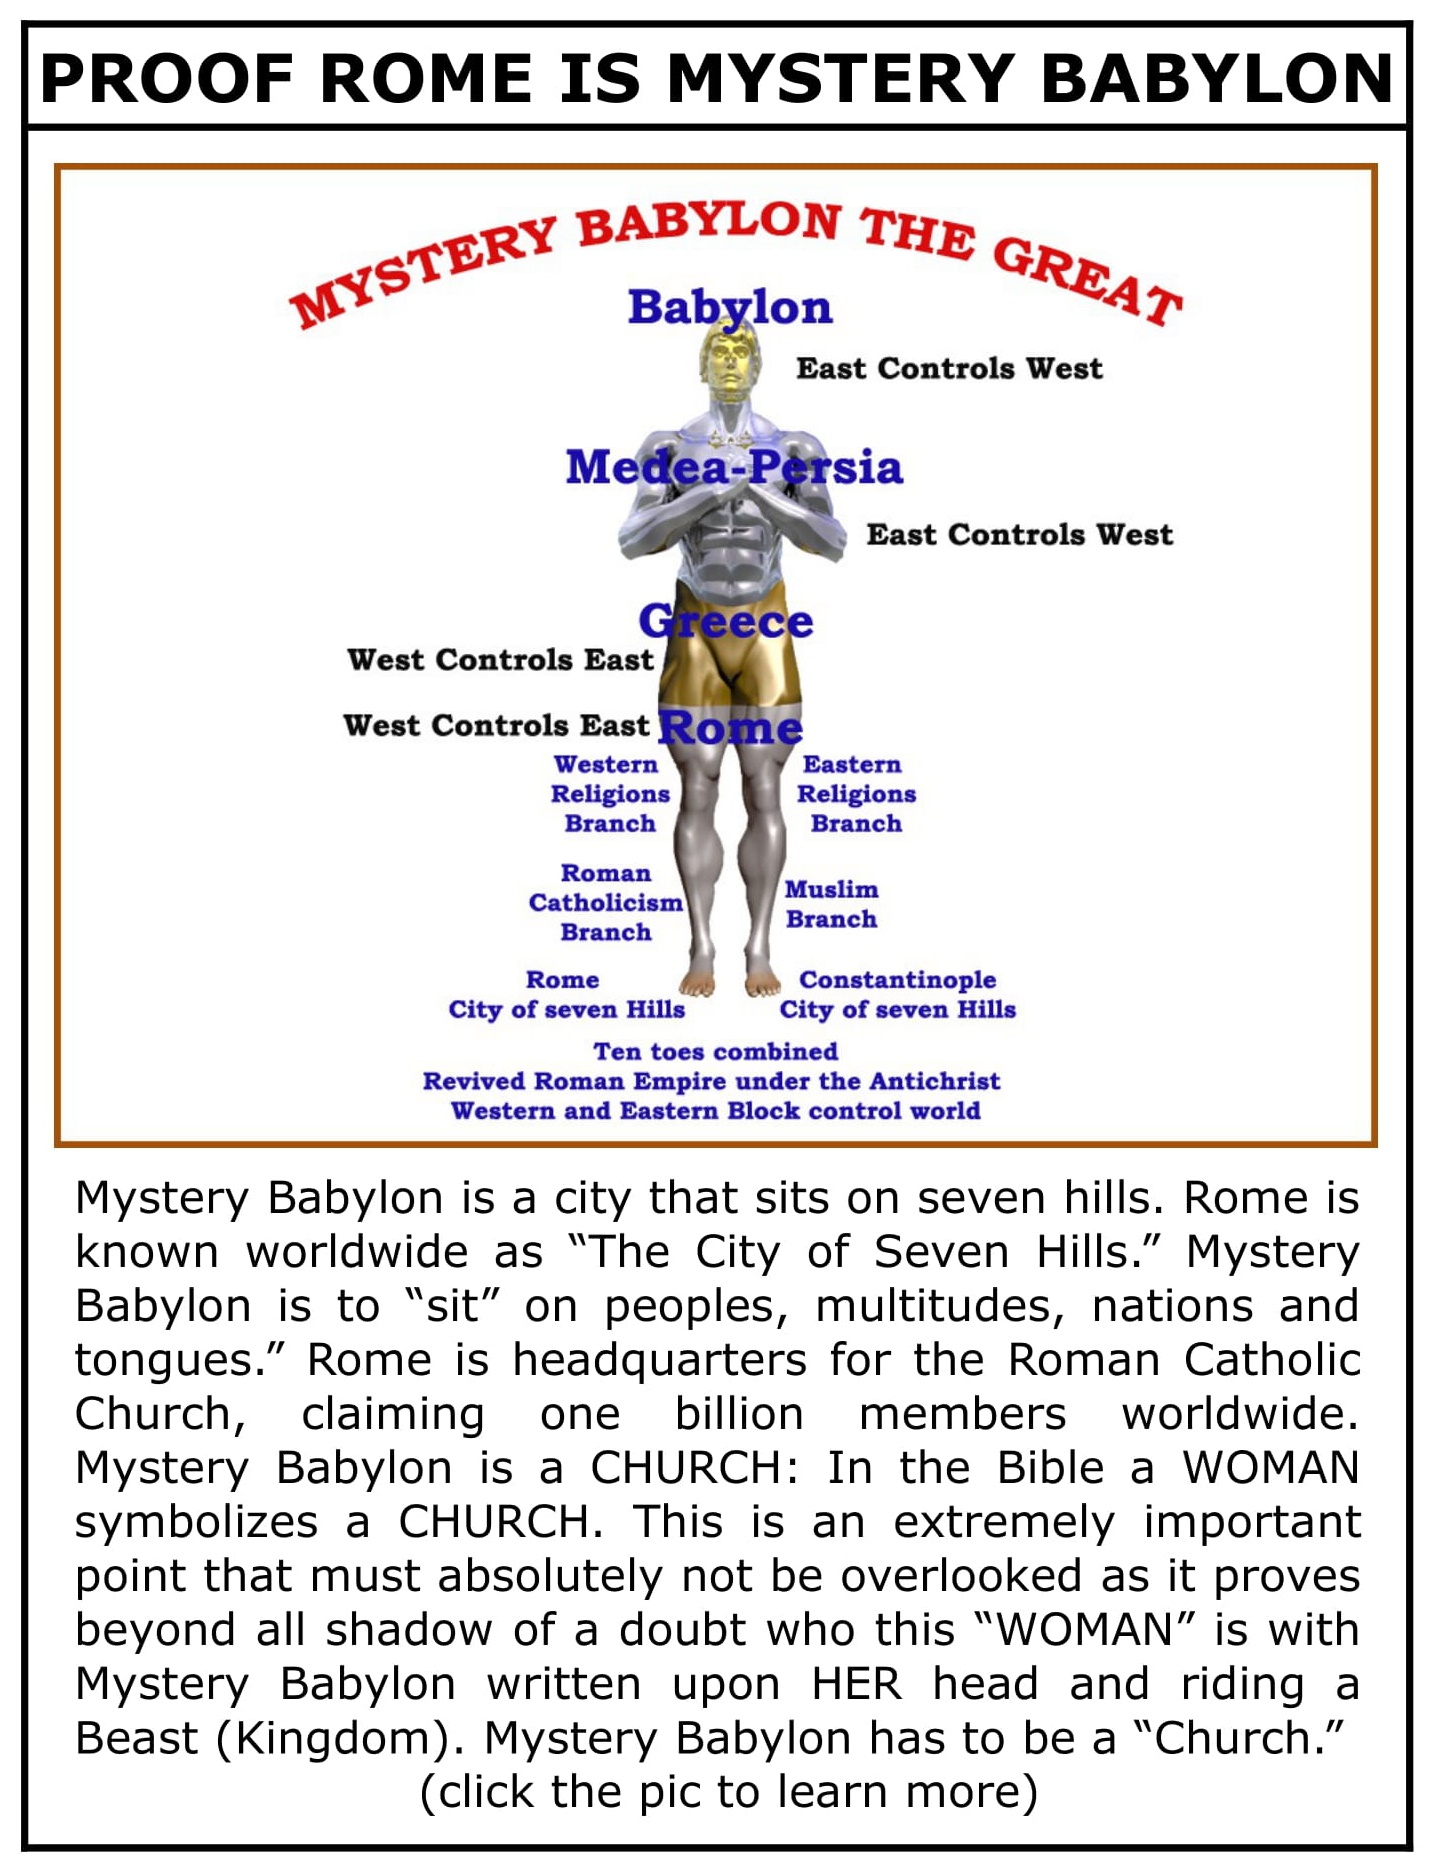 Proof Rome is Mystery Babylon